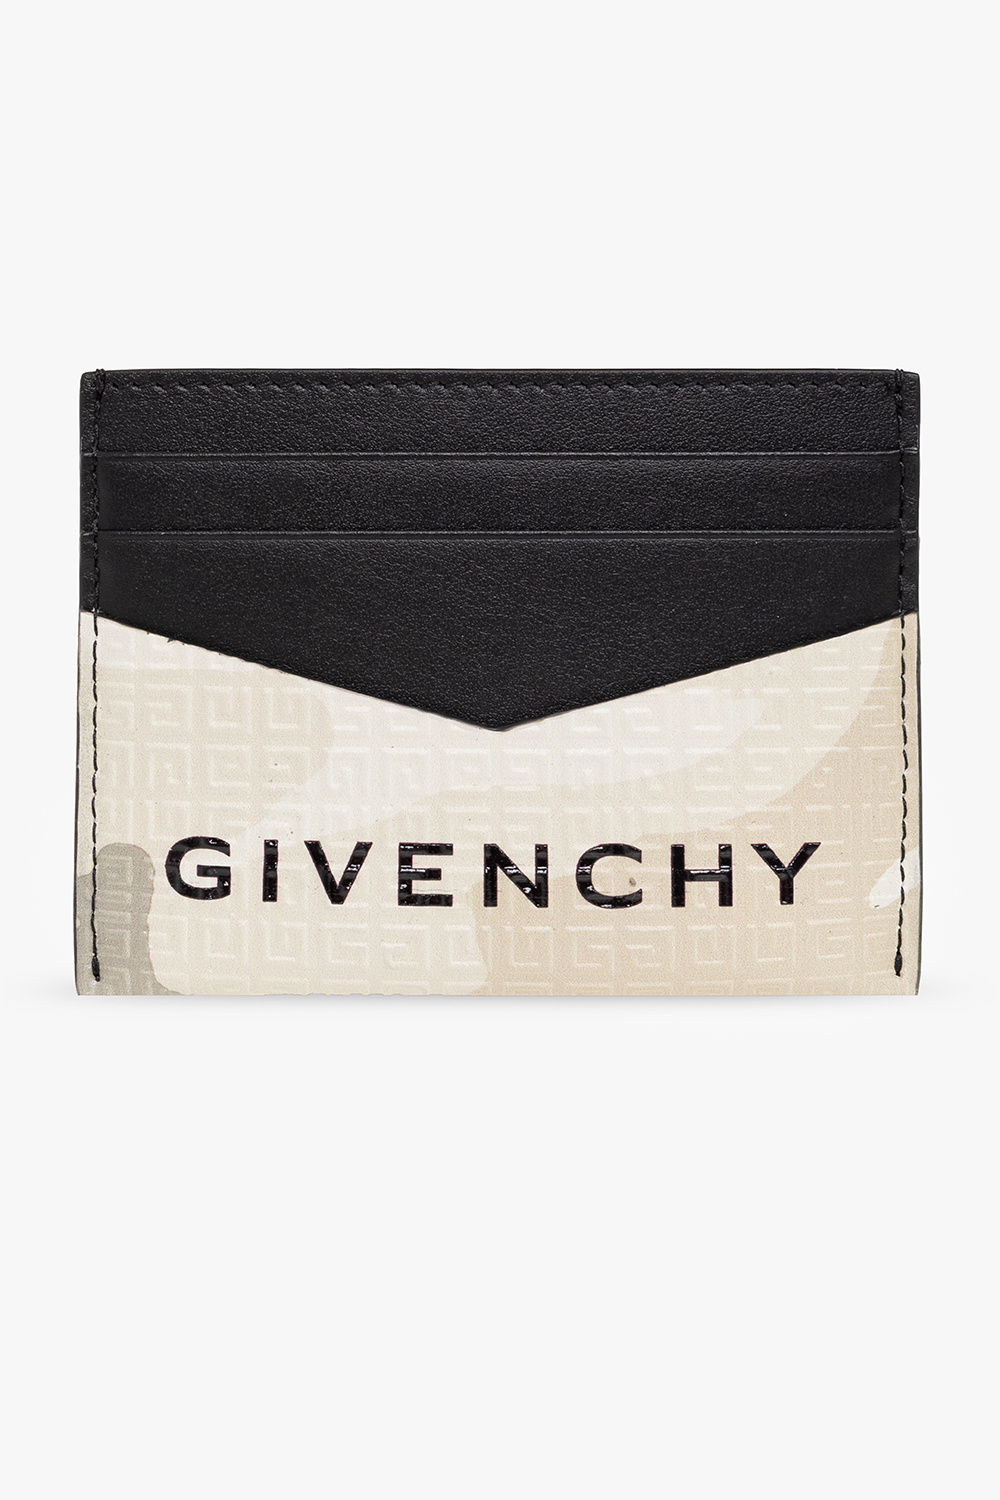 Givenchy givenchy givenchy chain print slides item